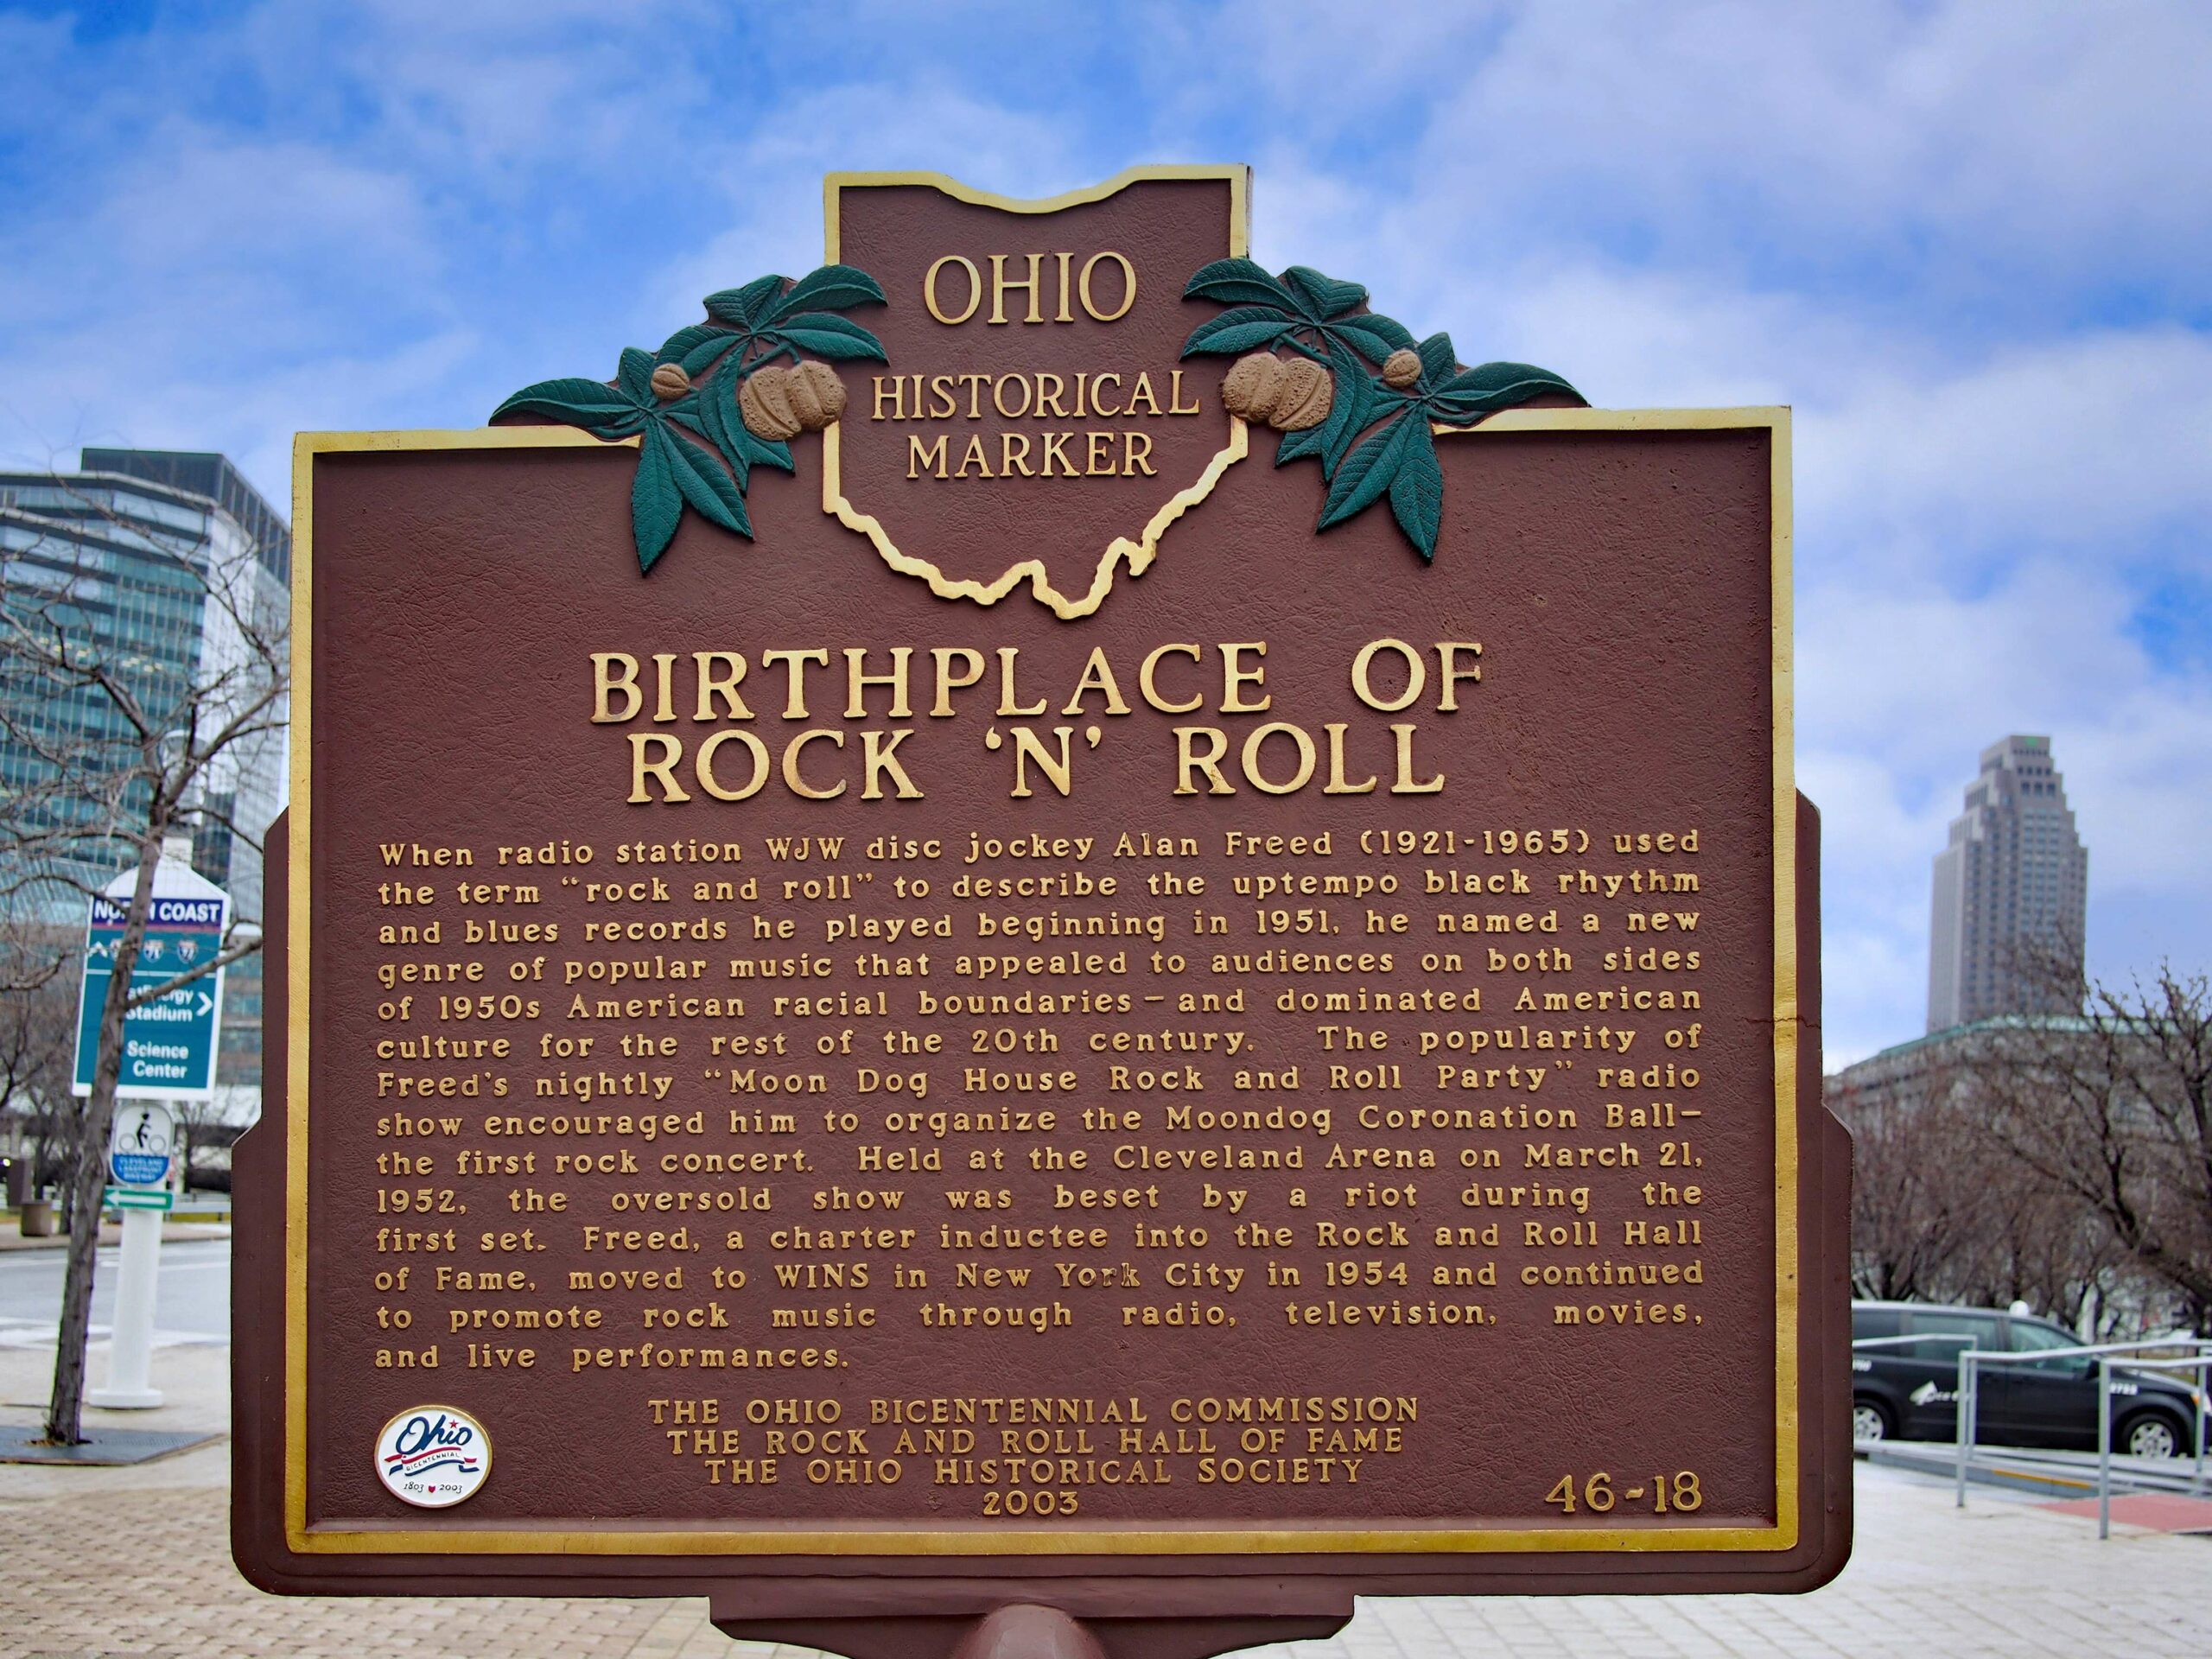 historical marker for the invention of Rock and Roll in Cleveland, Ohio